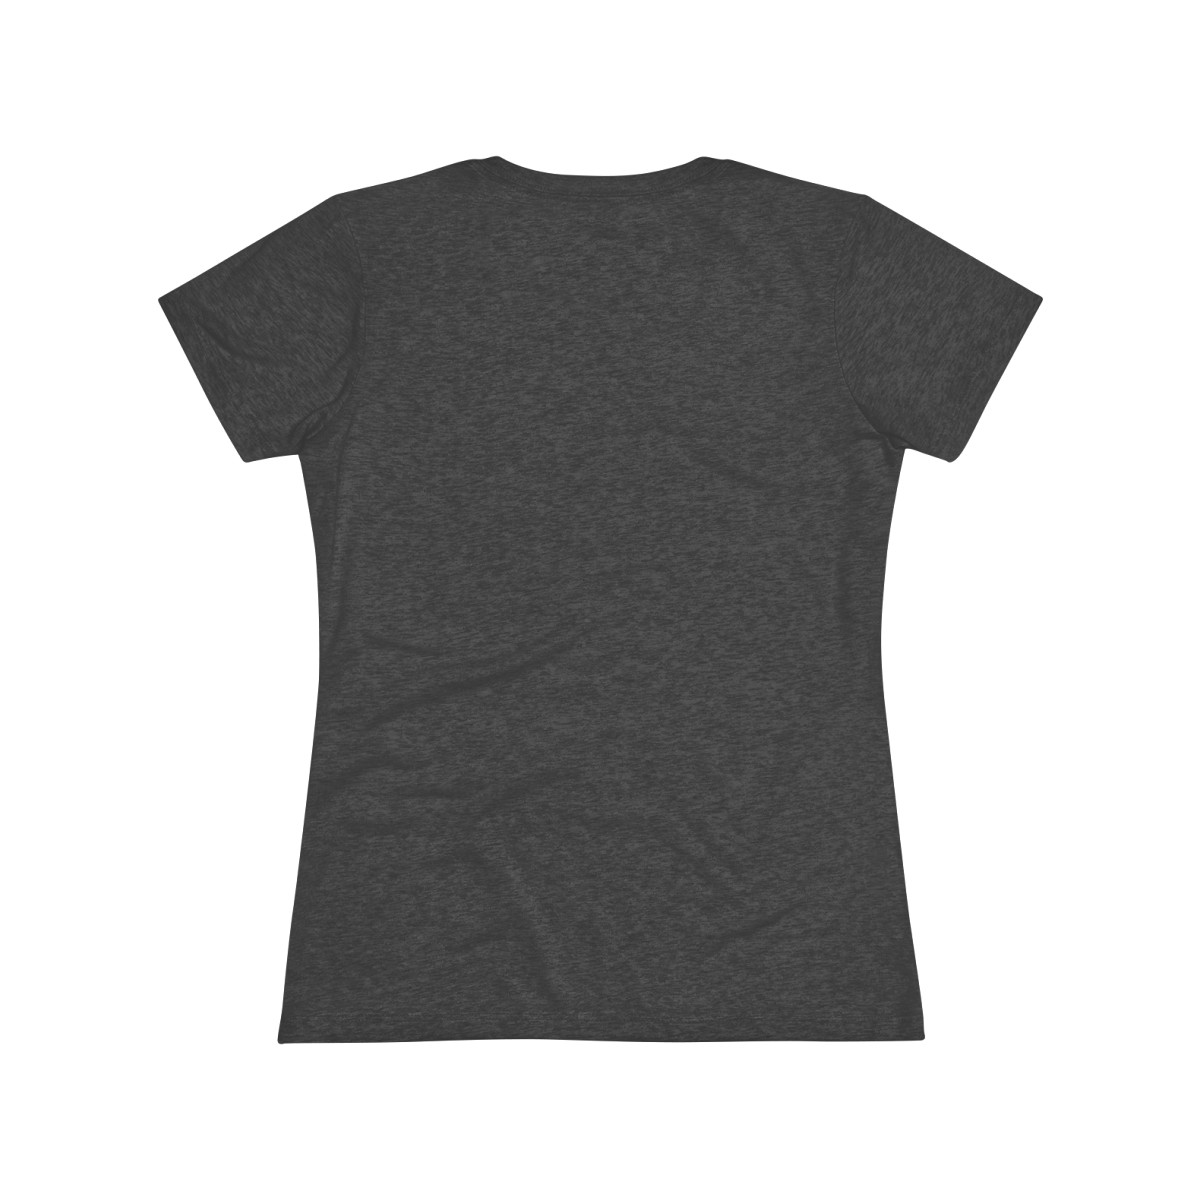 Super Friends Women's Triblend Tee product thumbnail image